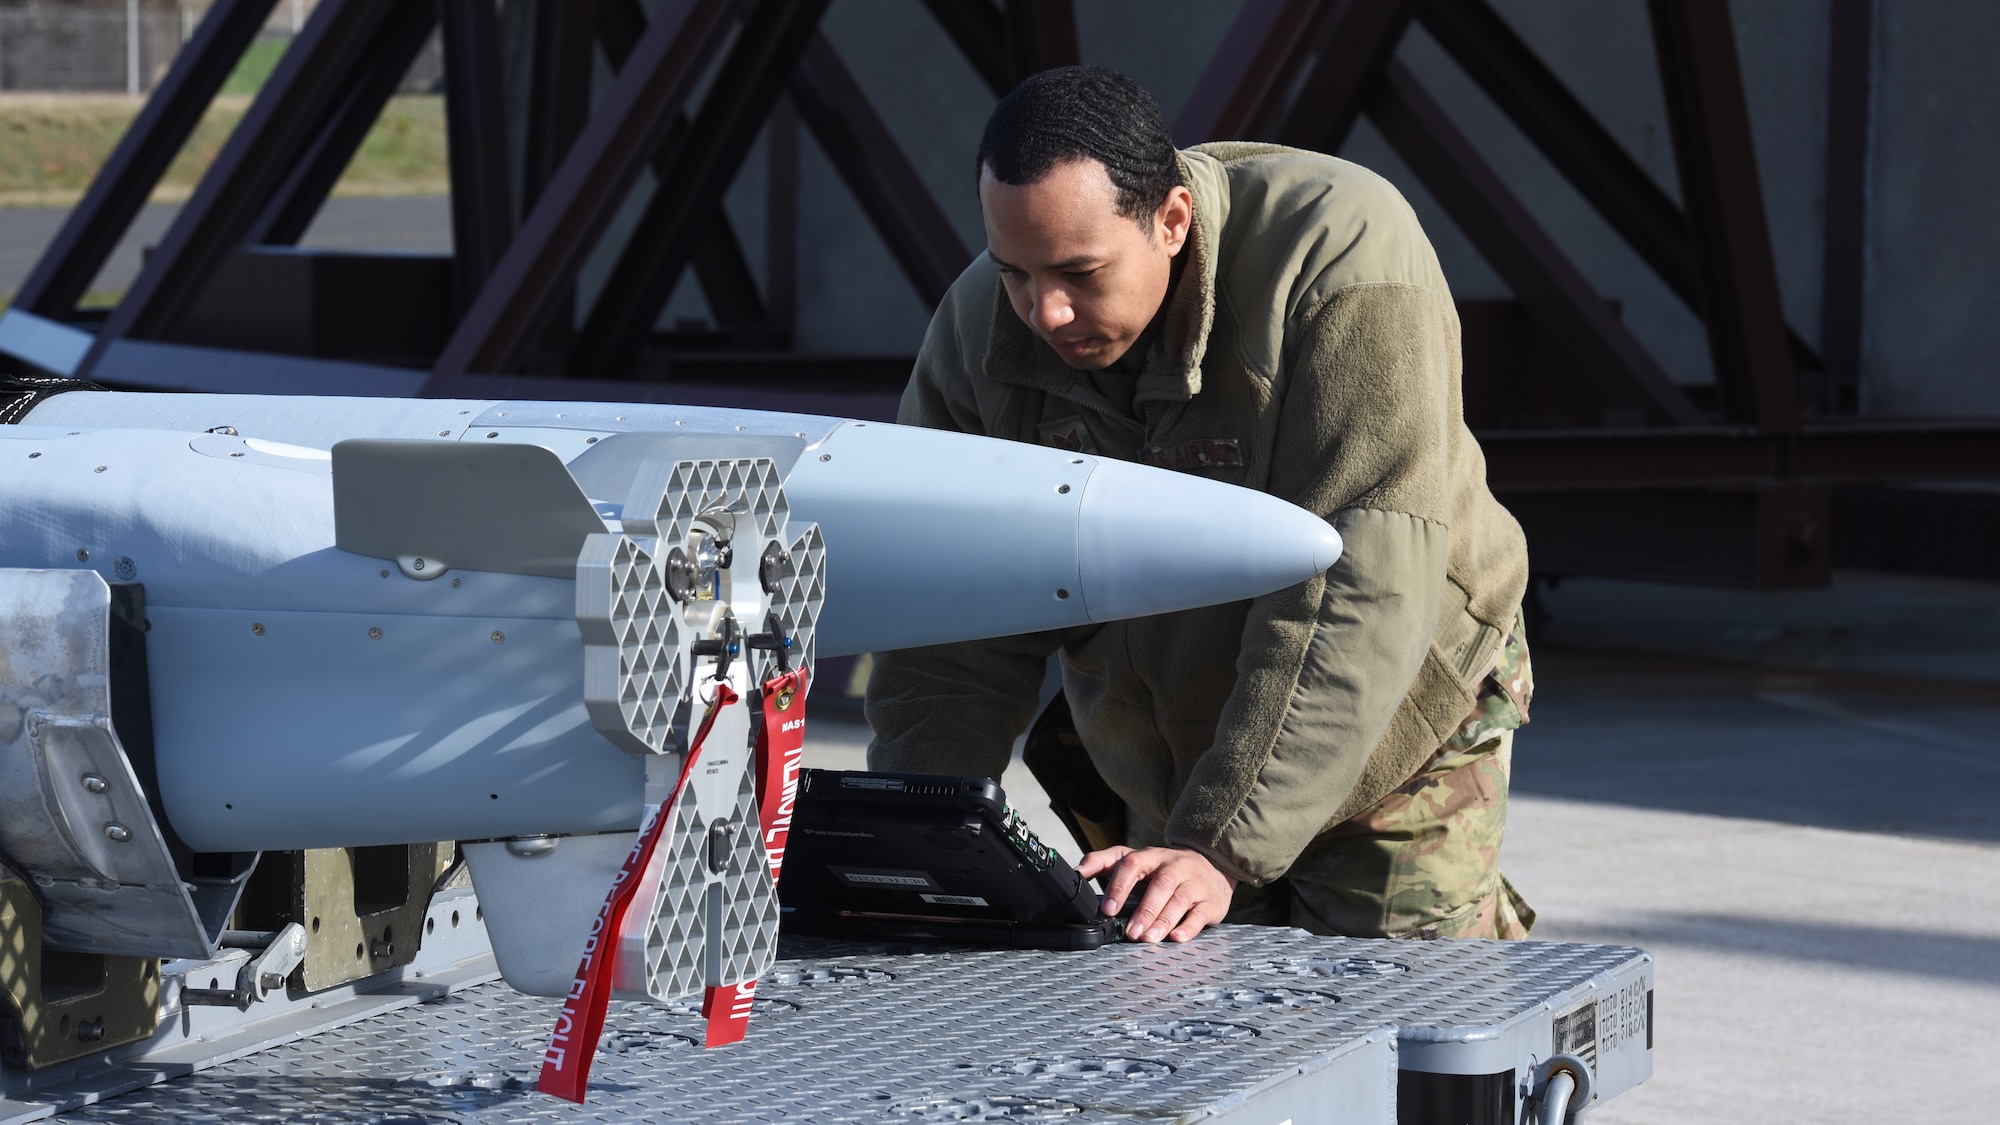 U.S. Air Force Tech Sgt. Keith Rochford, 52nd Aircraft Maintenance Squadron weapons load crew team chief, reviews technical orders before loading two ADM-160C Miniature Air Launched Decoy missiles during an exercise at Spangdahlem Air Base, Germany, April 27, 2021. 52nd AMXS Airmen participated in the exercise that saw a number of squadrons work together to load live munitions onto a U.S. Air Force F-16 Fighting Falcon. (U.S. Air Force photo by Tech. Sgt. Tony Plyler)